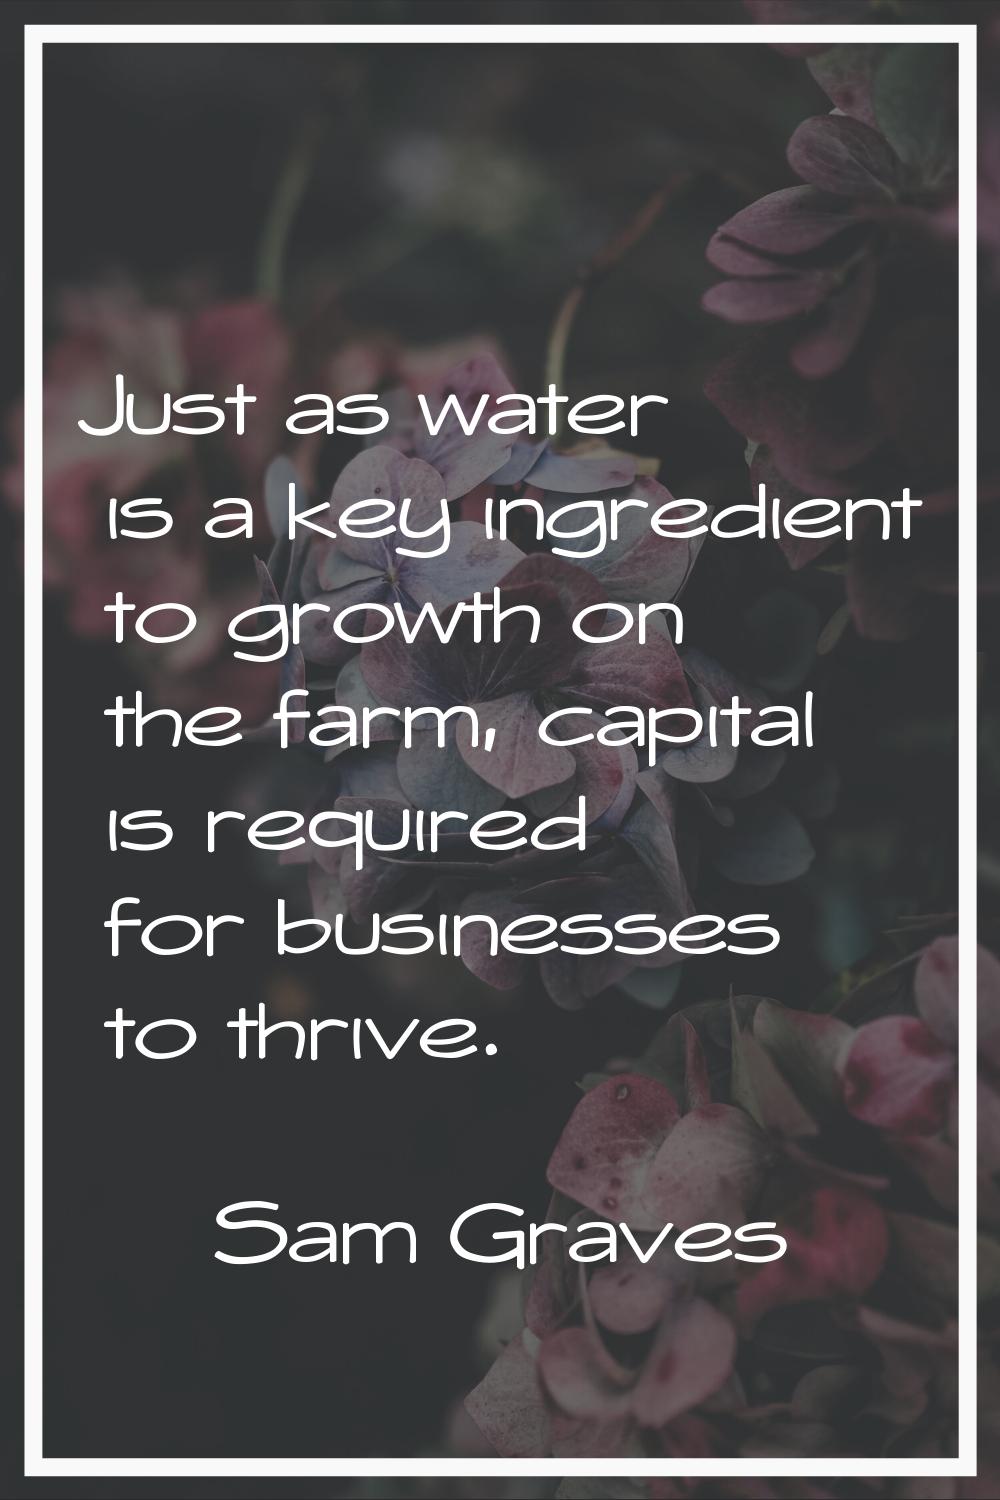 Just as water is a key ingredient to growth on the farm, capital is required for businesses to thri